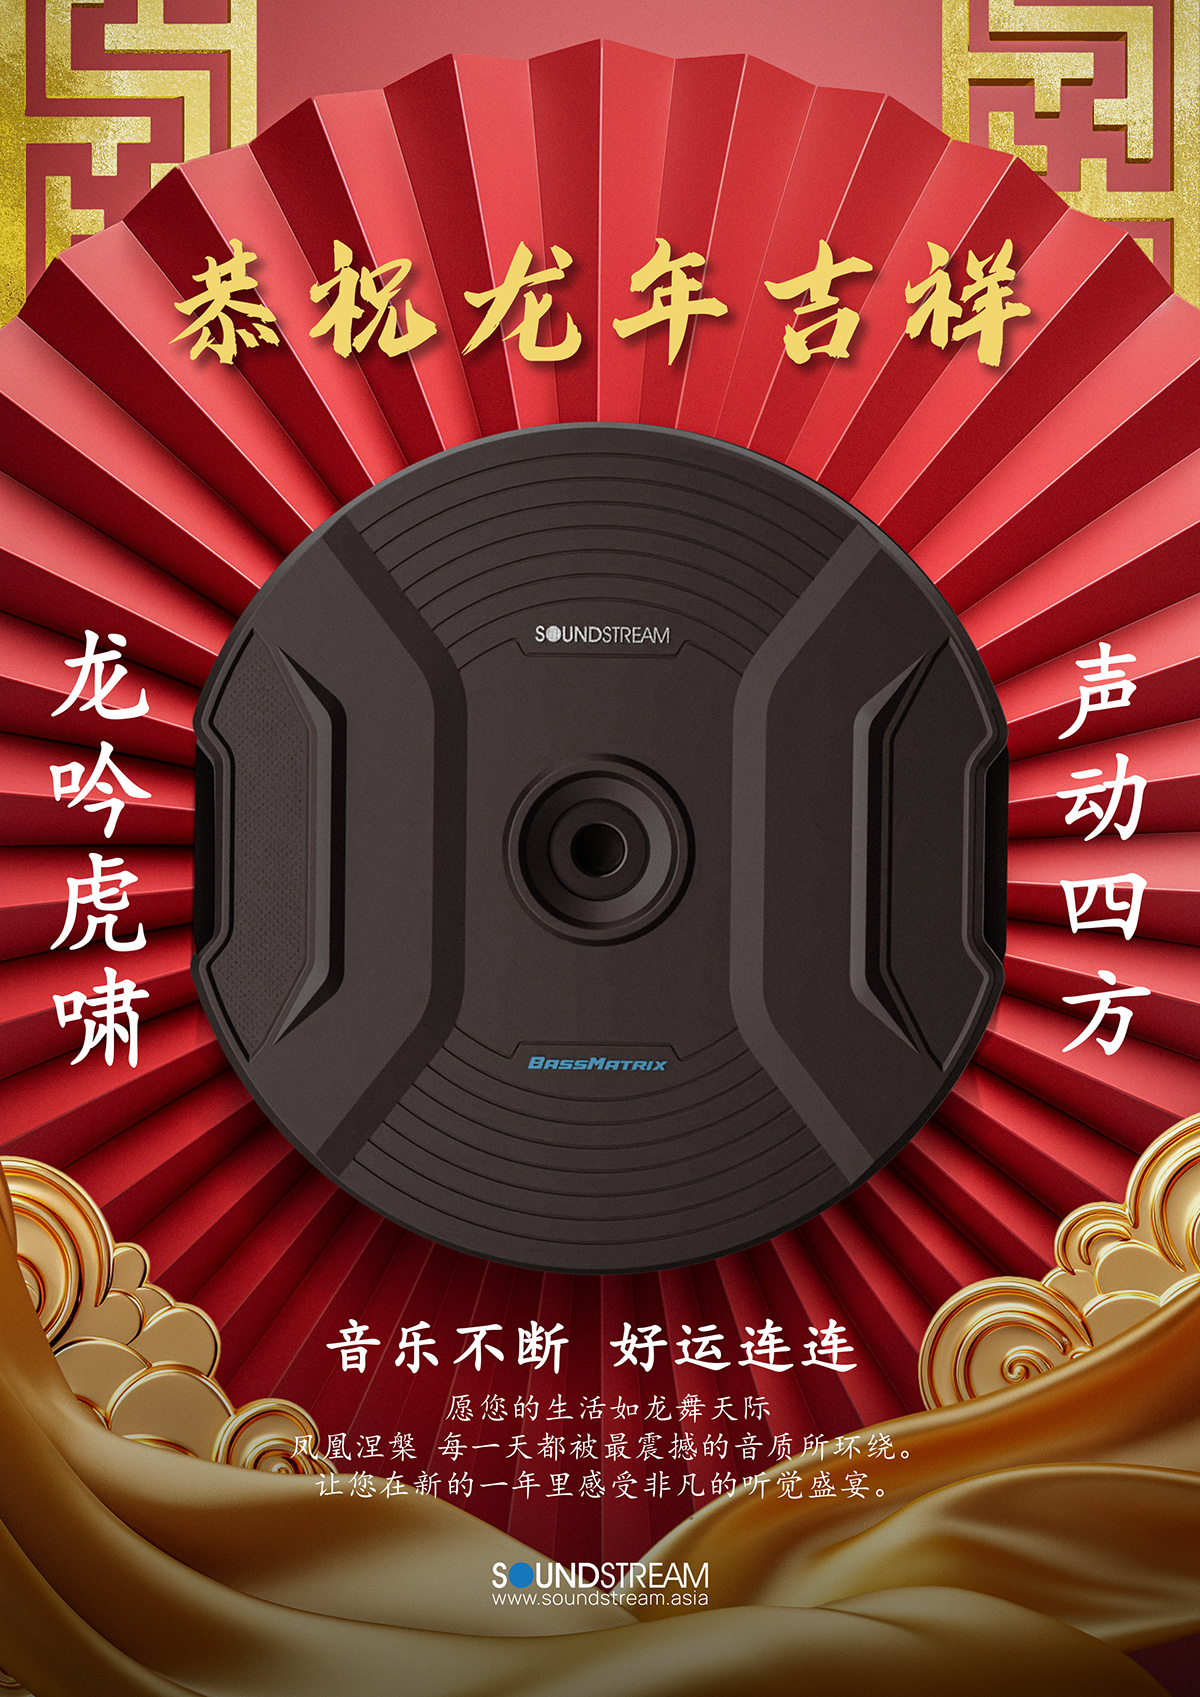 chinese new year soundstream Advertising  poster car audio automotive   digital imaging  Poster Design Photo Manipulation 